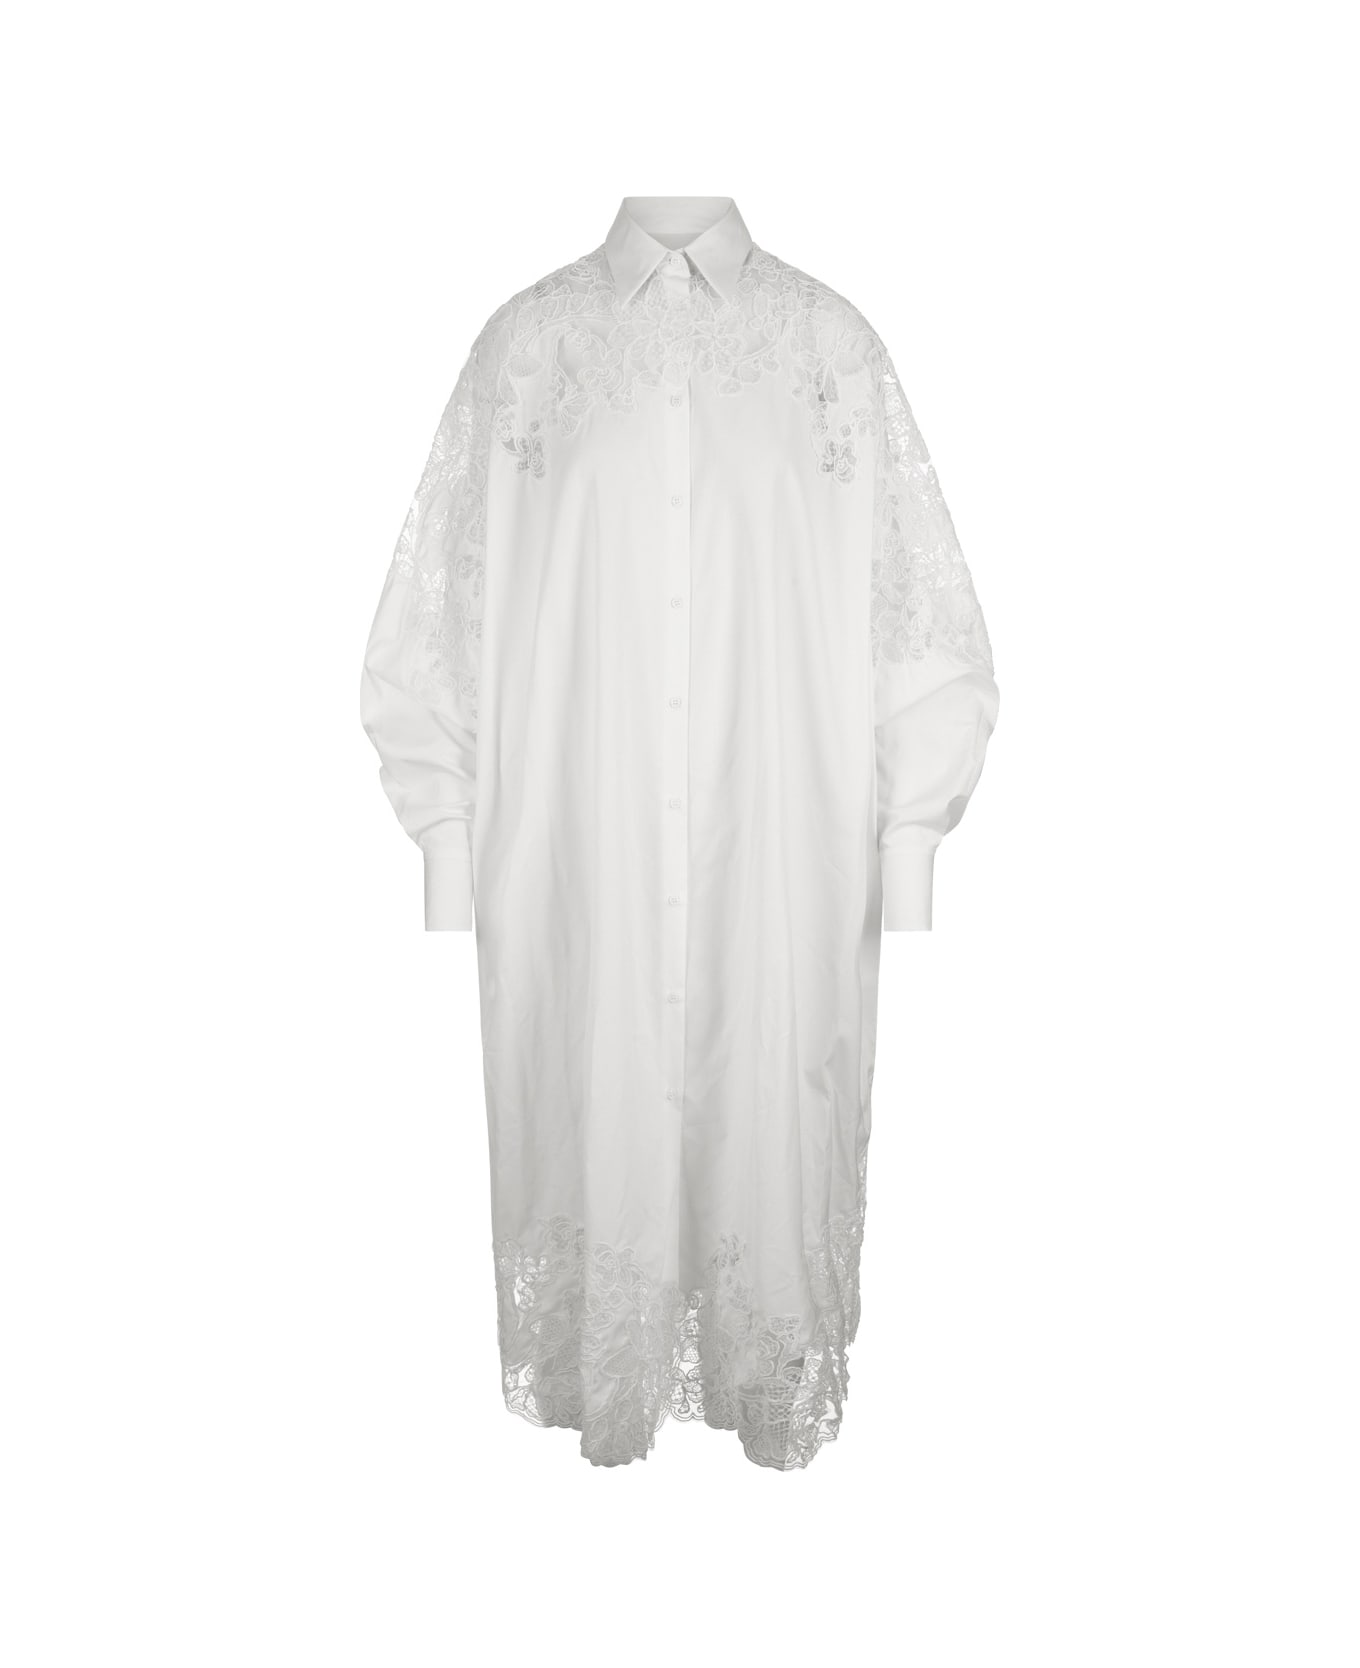 Ermanno Scervino White Oversized Shirt Dress With Lace - White